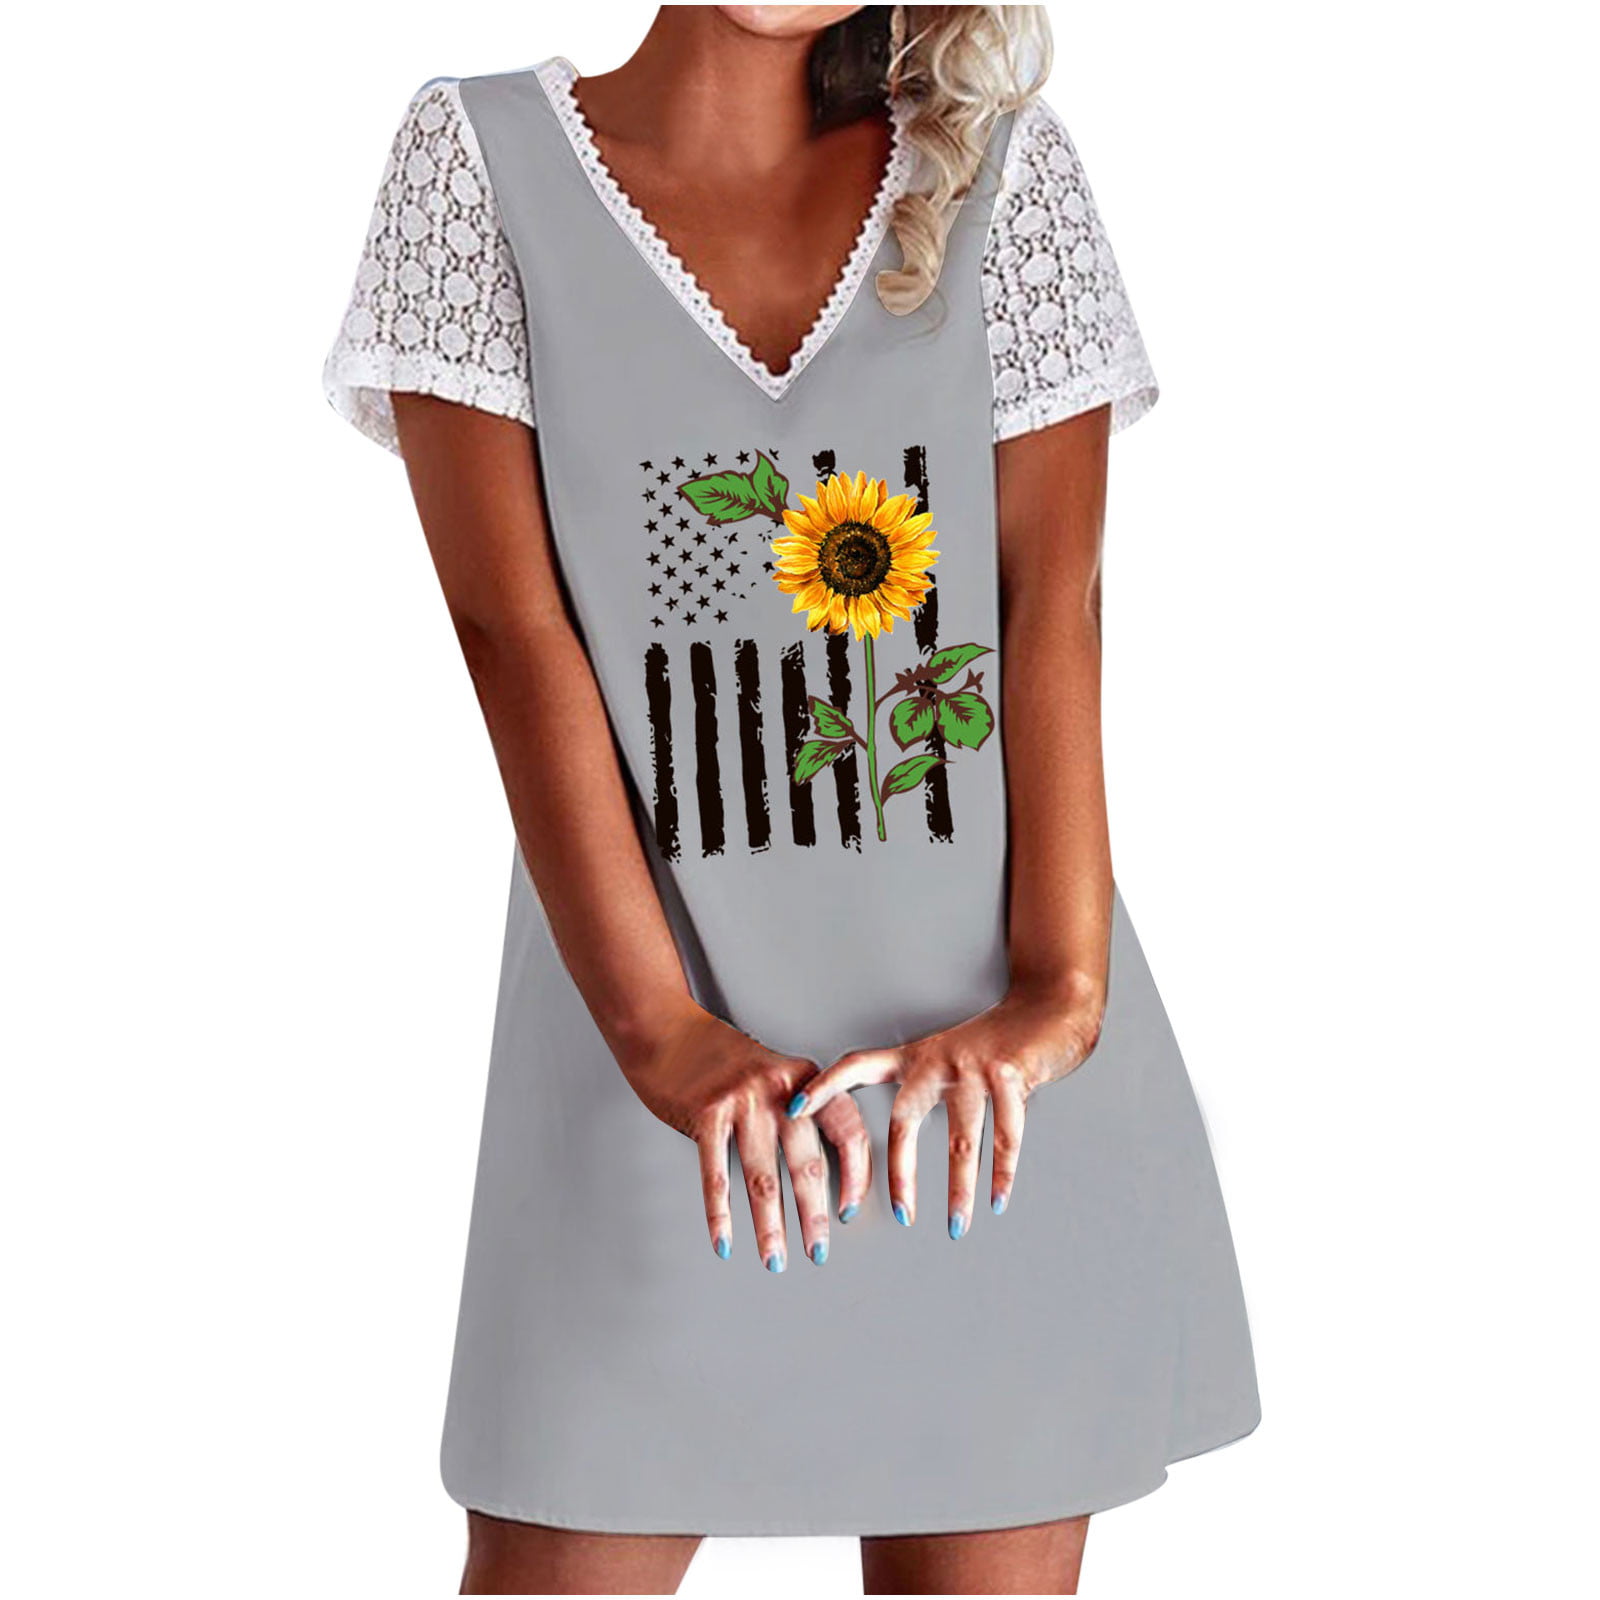 Xihbxyly Sundresses for Women Independence Day for Women 4th of July Dress Print V-Neck Short Sleeve Midi Dresses Floral Short Wedding Dresses Knee Length Party Dress #2 - Walmart.com